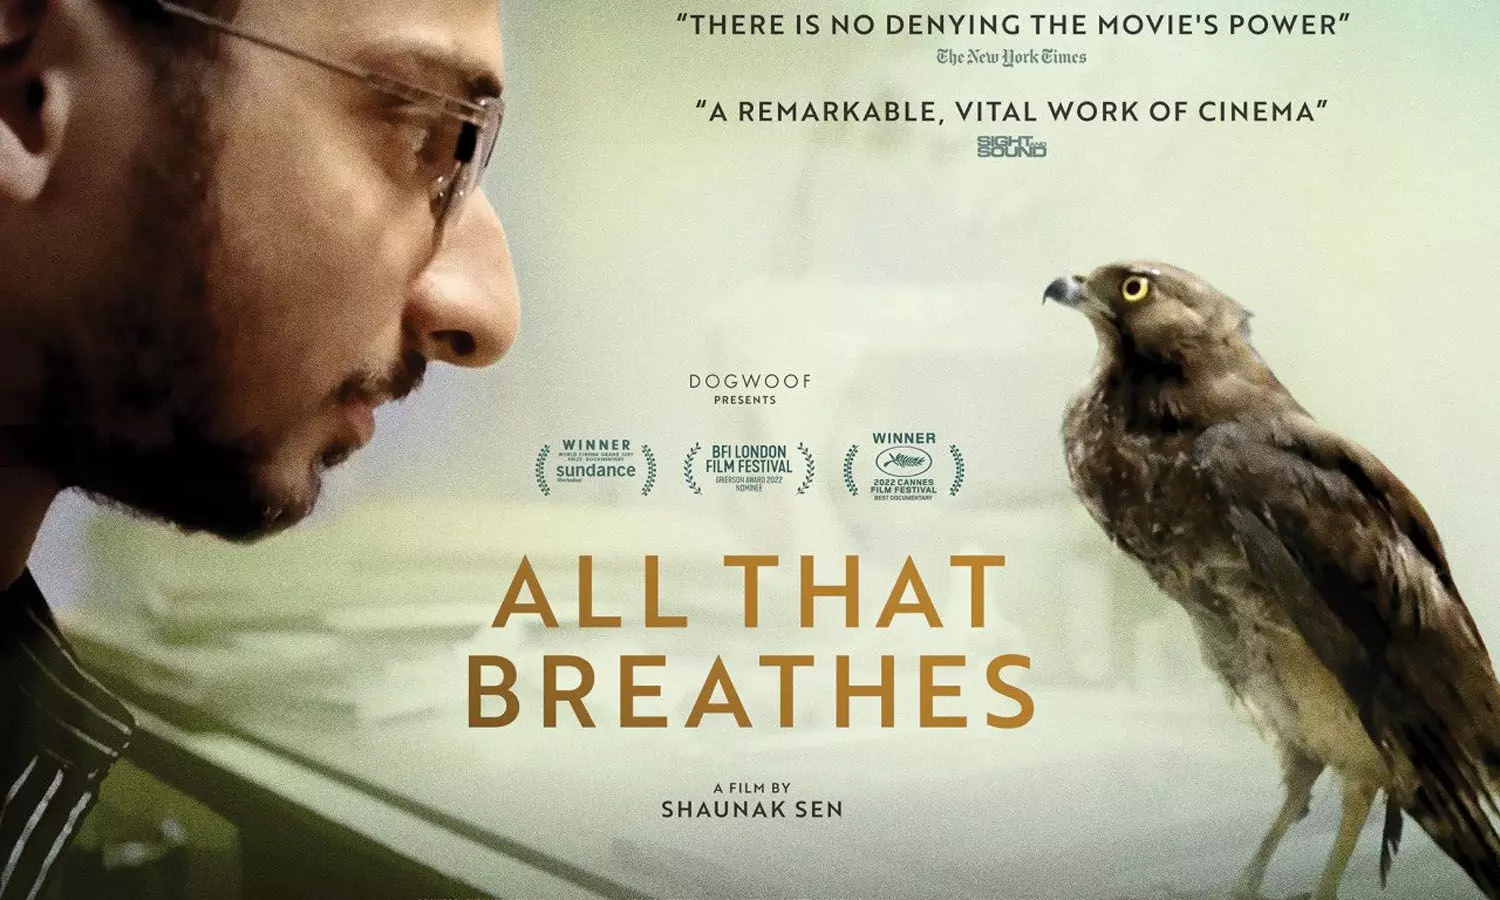 Indian documentary All That Breathes disappoints at the Oscars